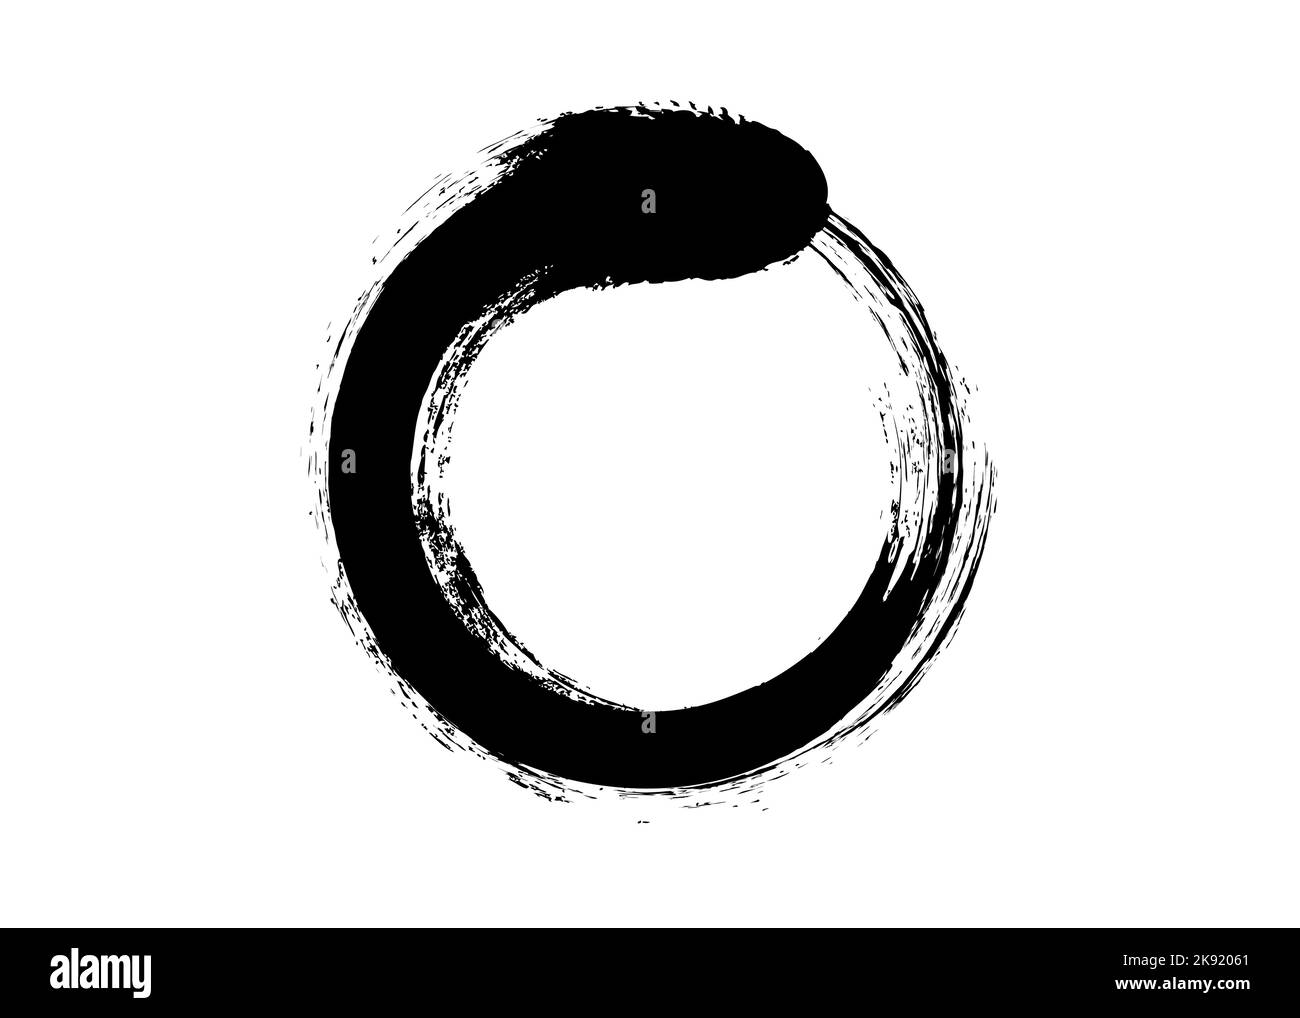 Black enso zen circle on white background. Round logo icon in art paint brush style graphic design. Vector illustration isolated Stock Vector